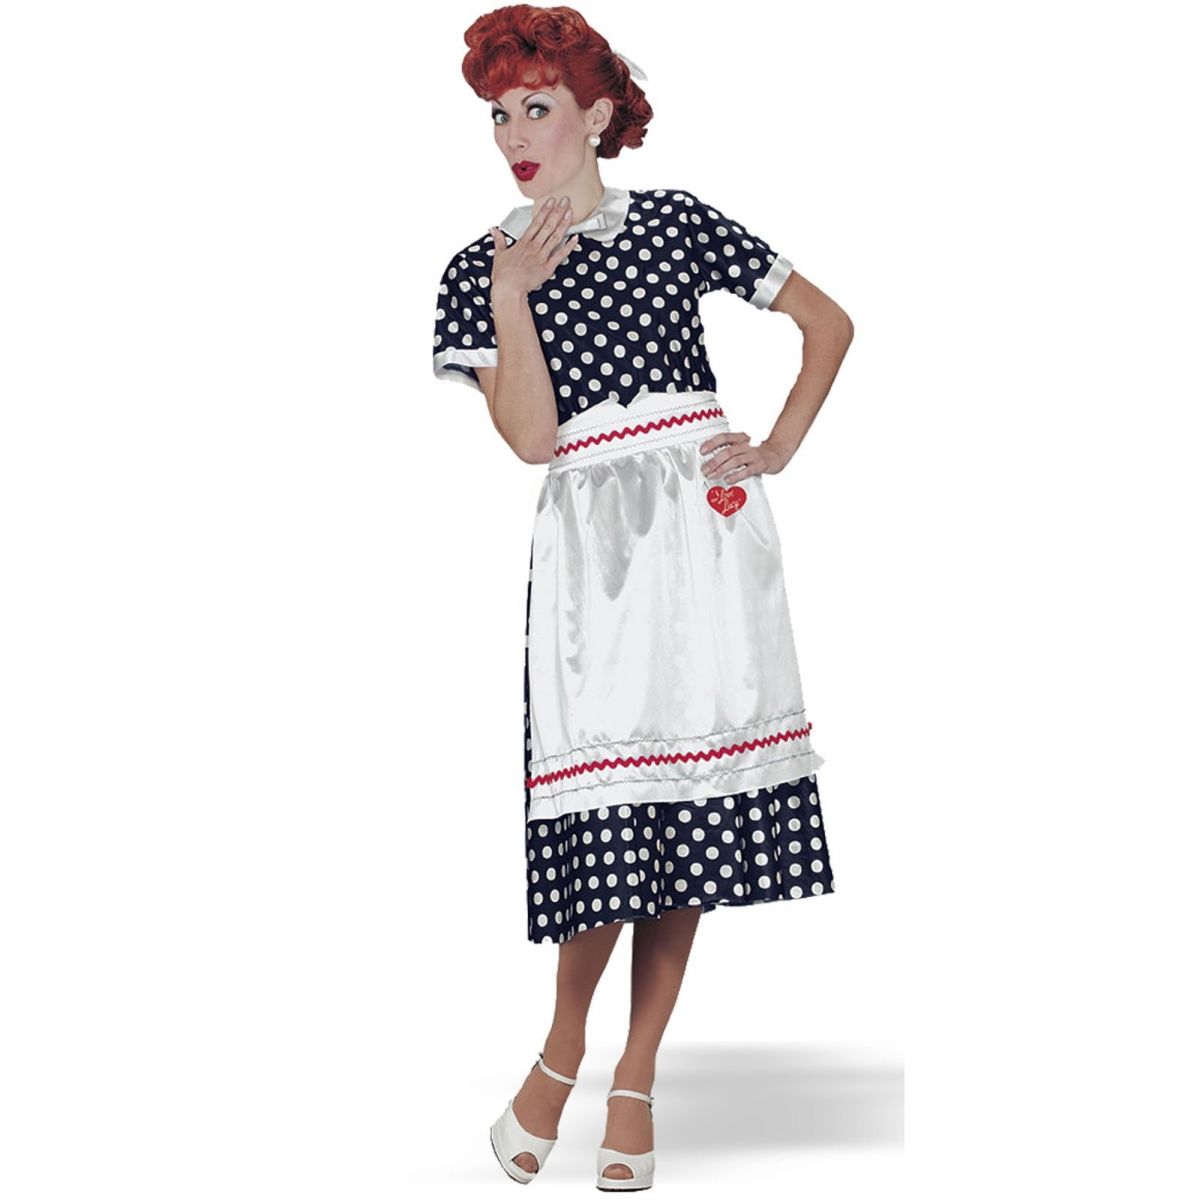 Lucille Ball Costume 99